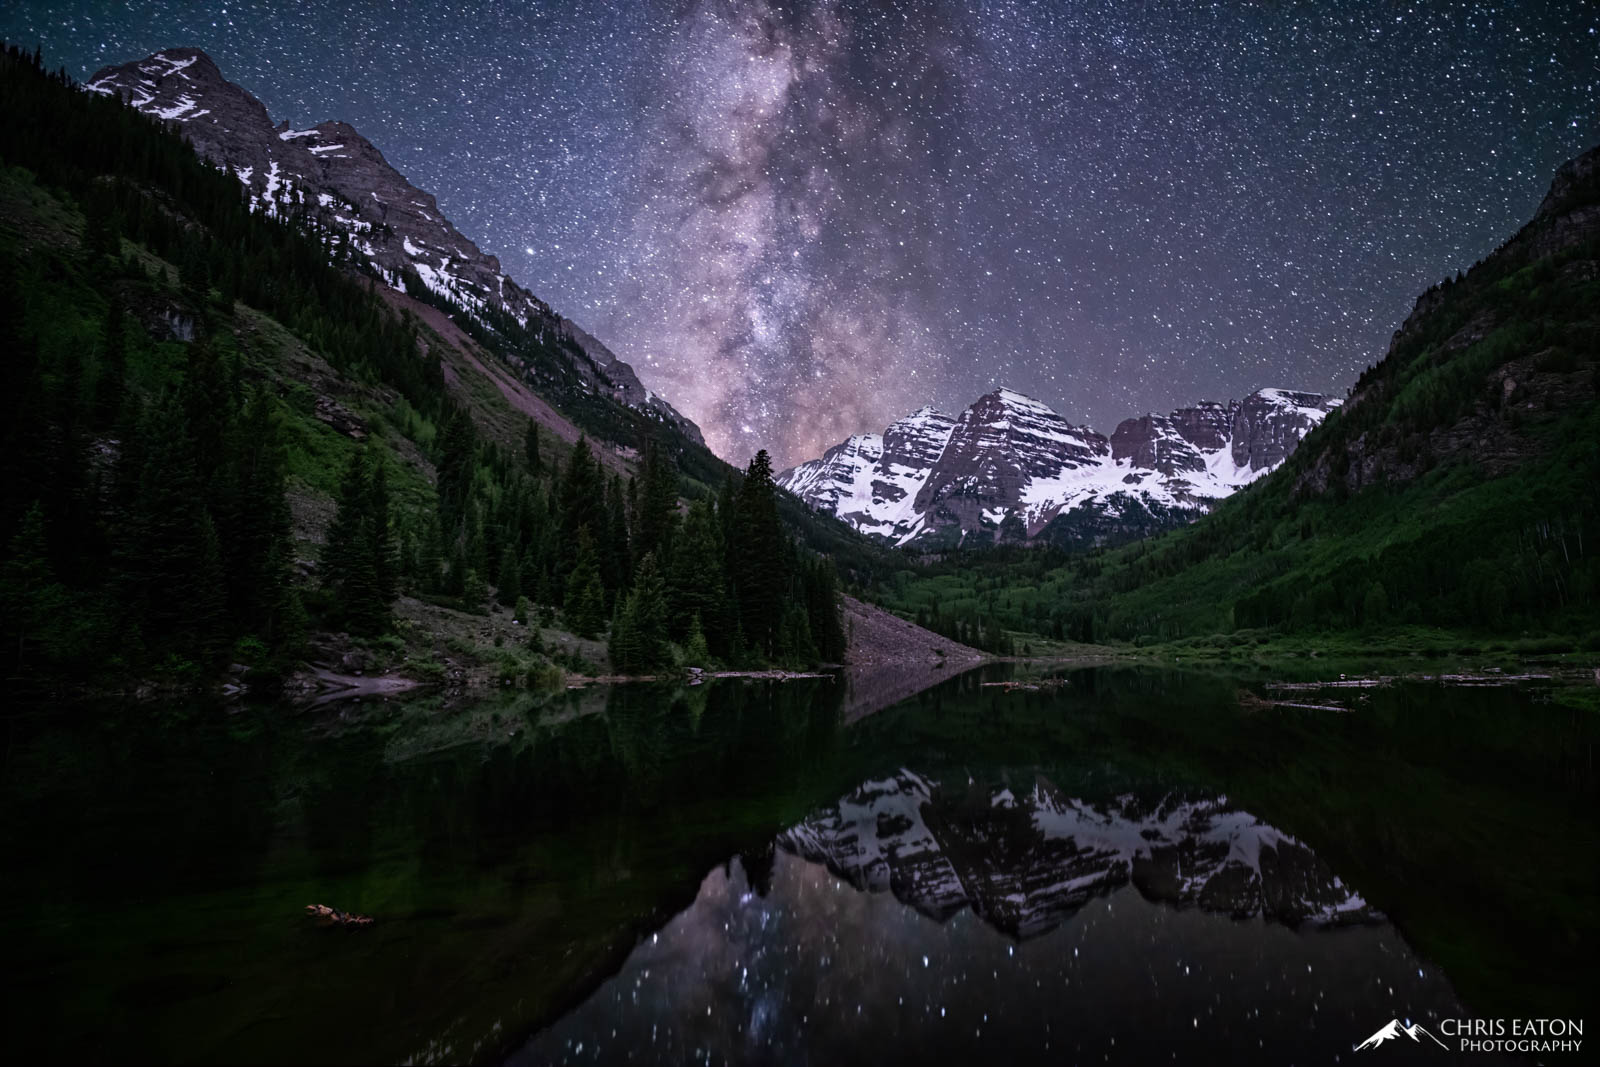 The Milky Way, our galaxy, rises over the Maroon Bells and Maroon Lake, where its reflection imprints the calm waters.